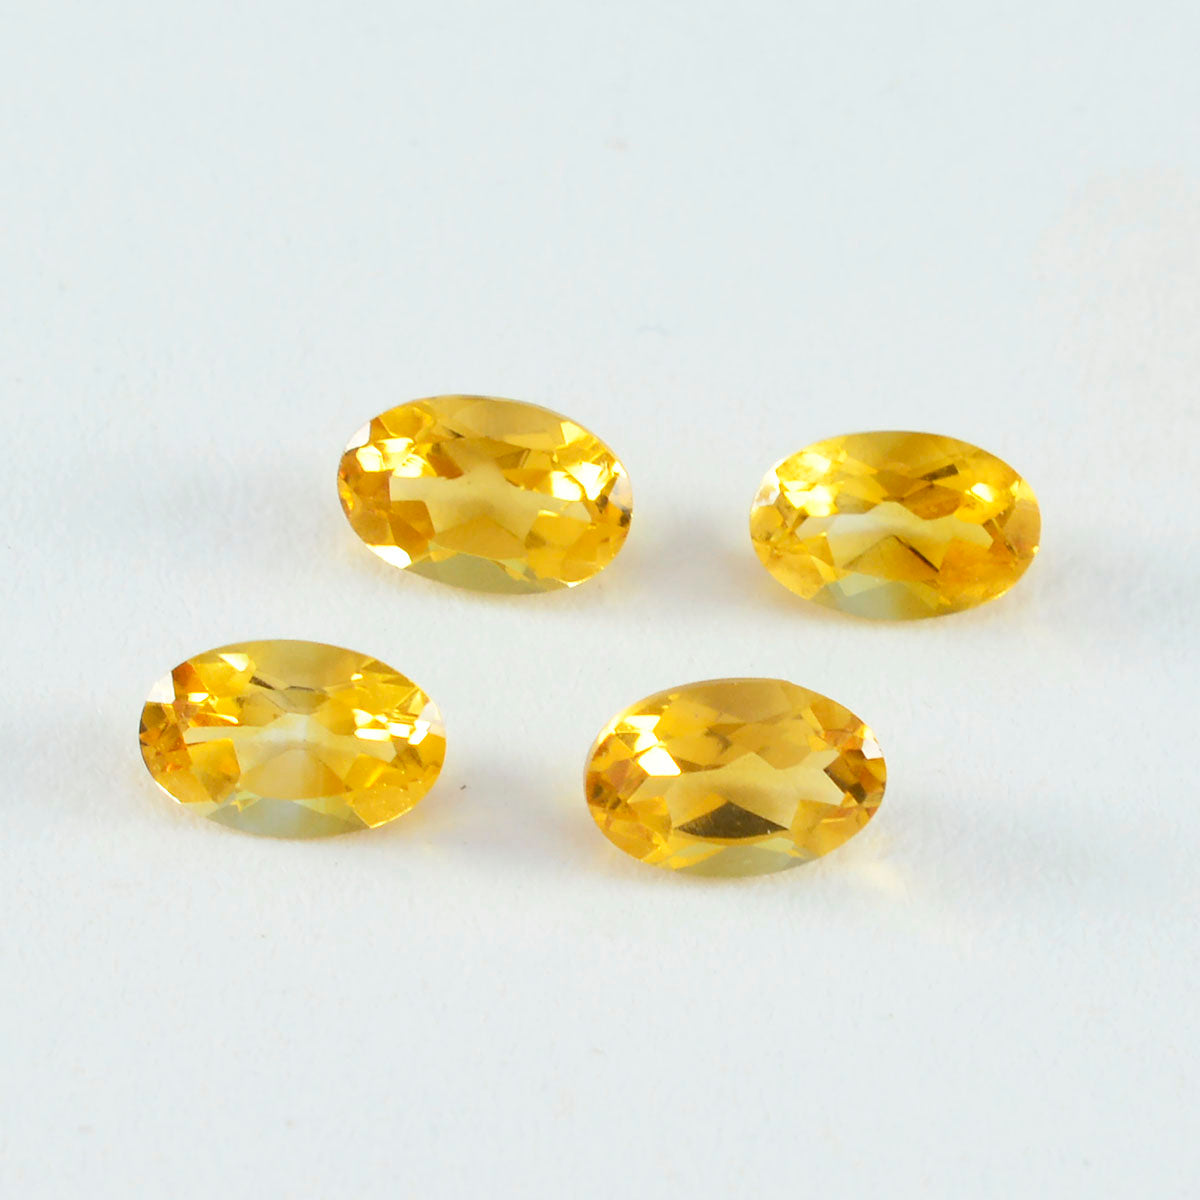 Riyogems 1PC Real Yellow Citrine Faceted 6x8 mm Oval Shape attractive Quality Loose Stone